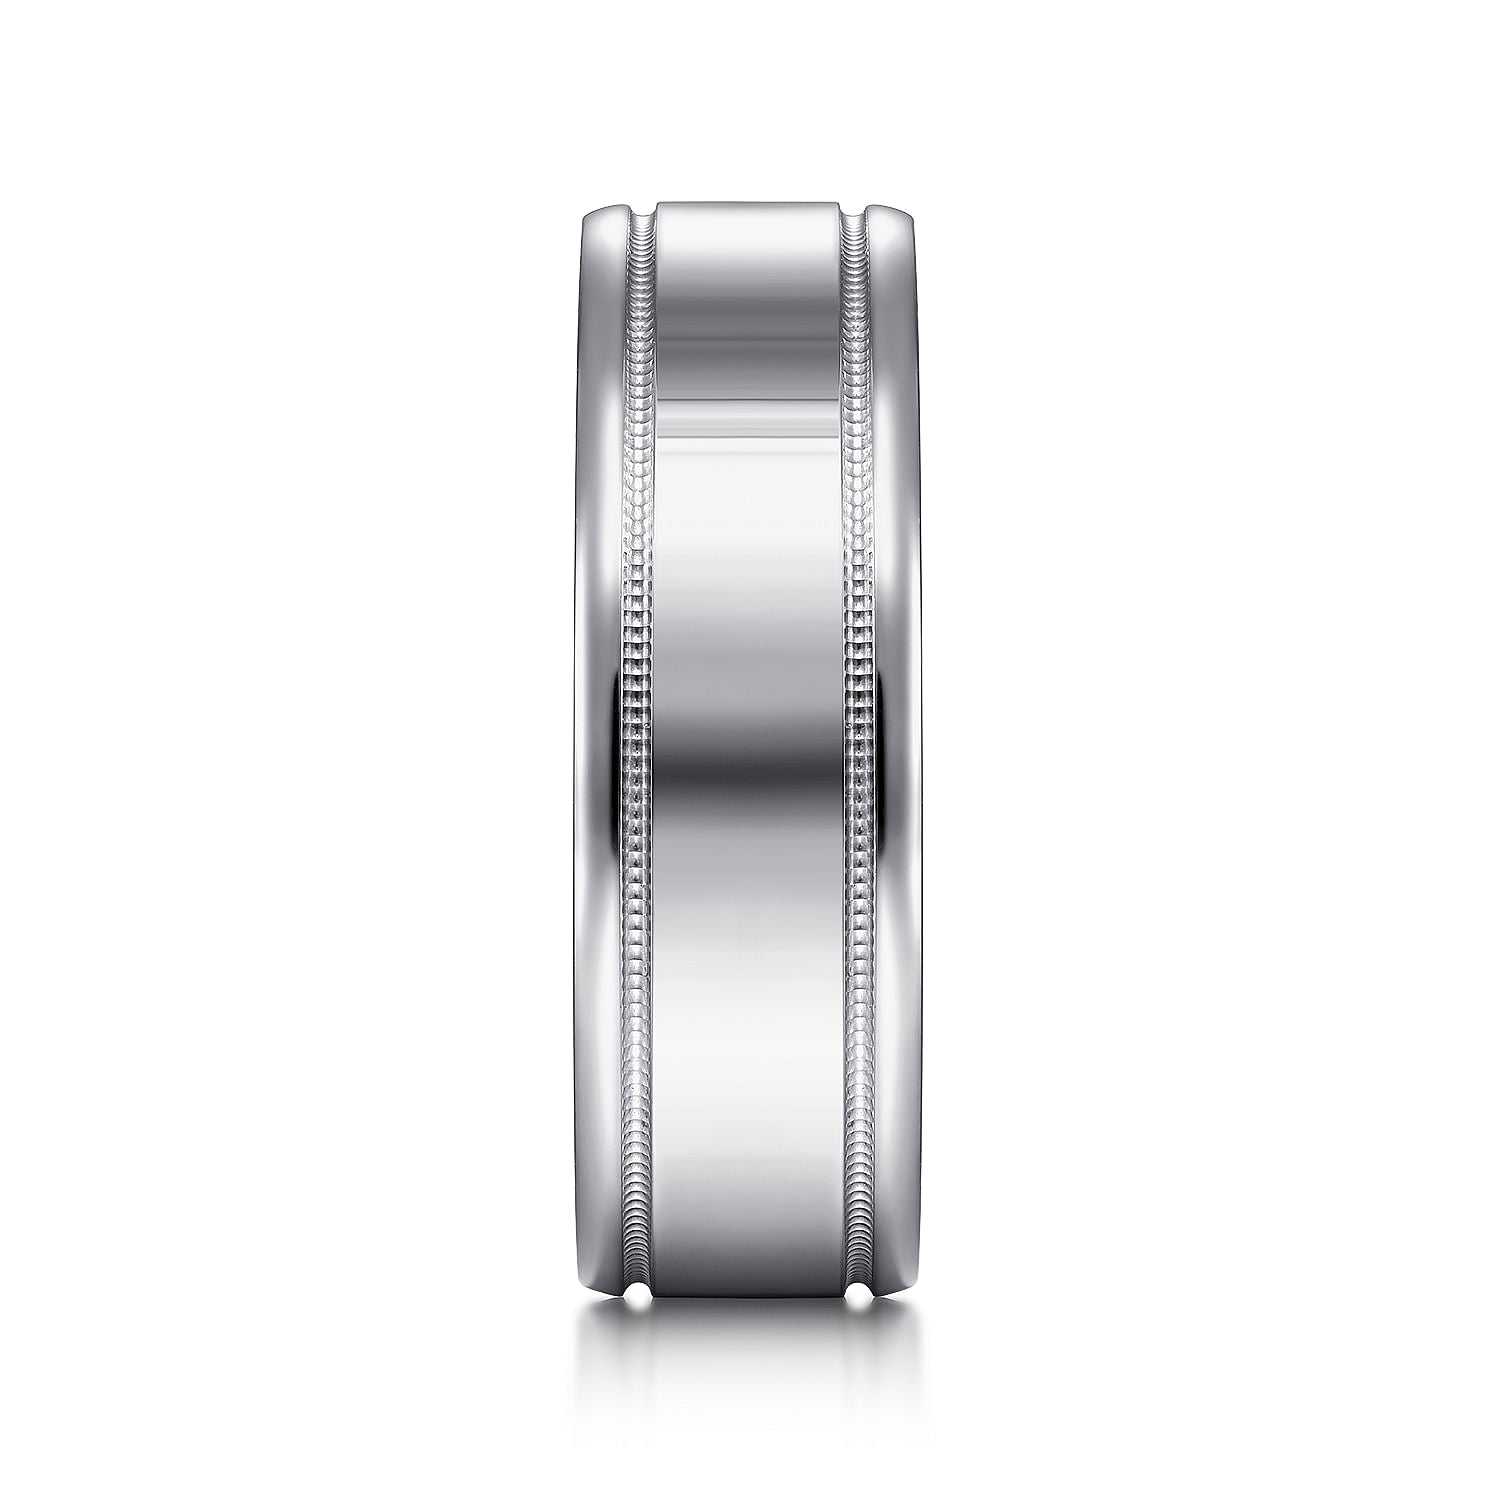 Gabriel & Co White Gold Wedding Band With A Polished Center, Milgrain Trim And Polished Edges - Gold Wedding Bands - Men's